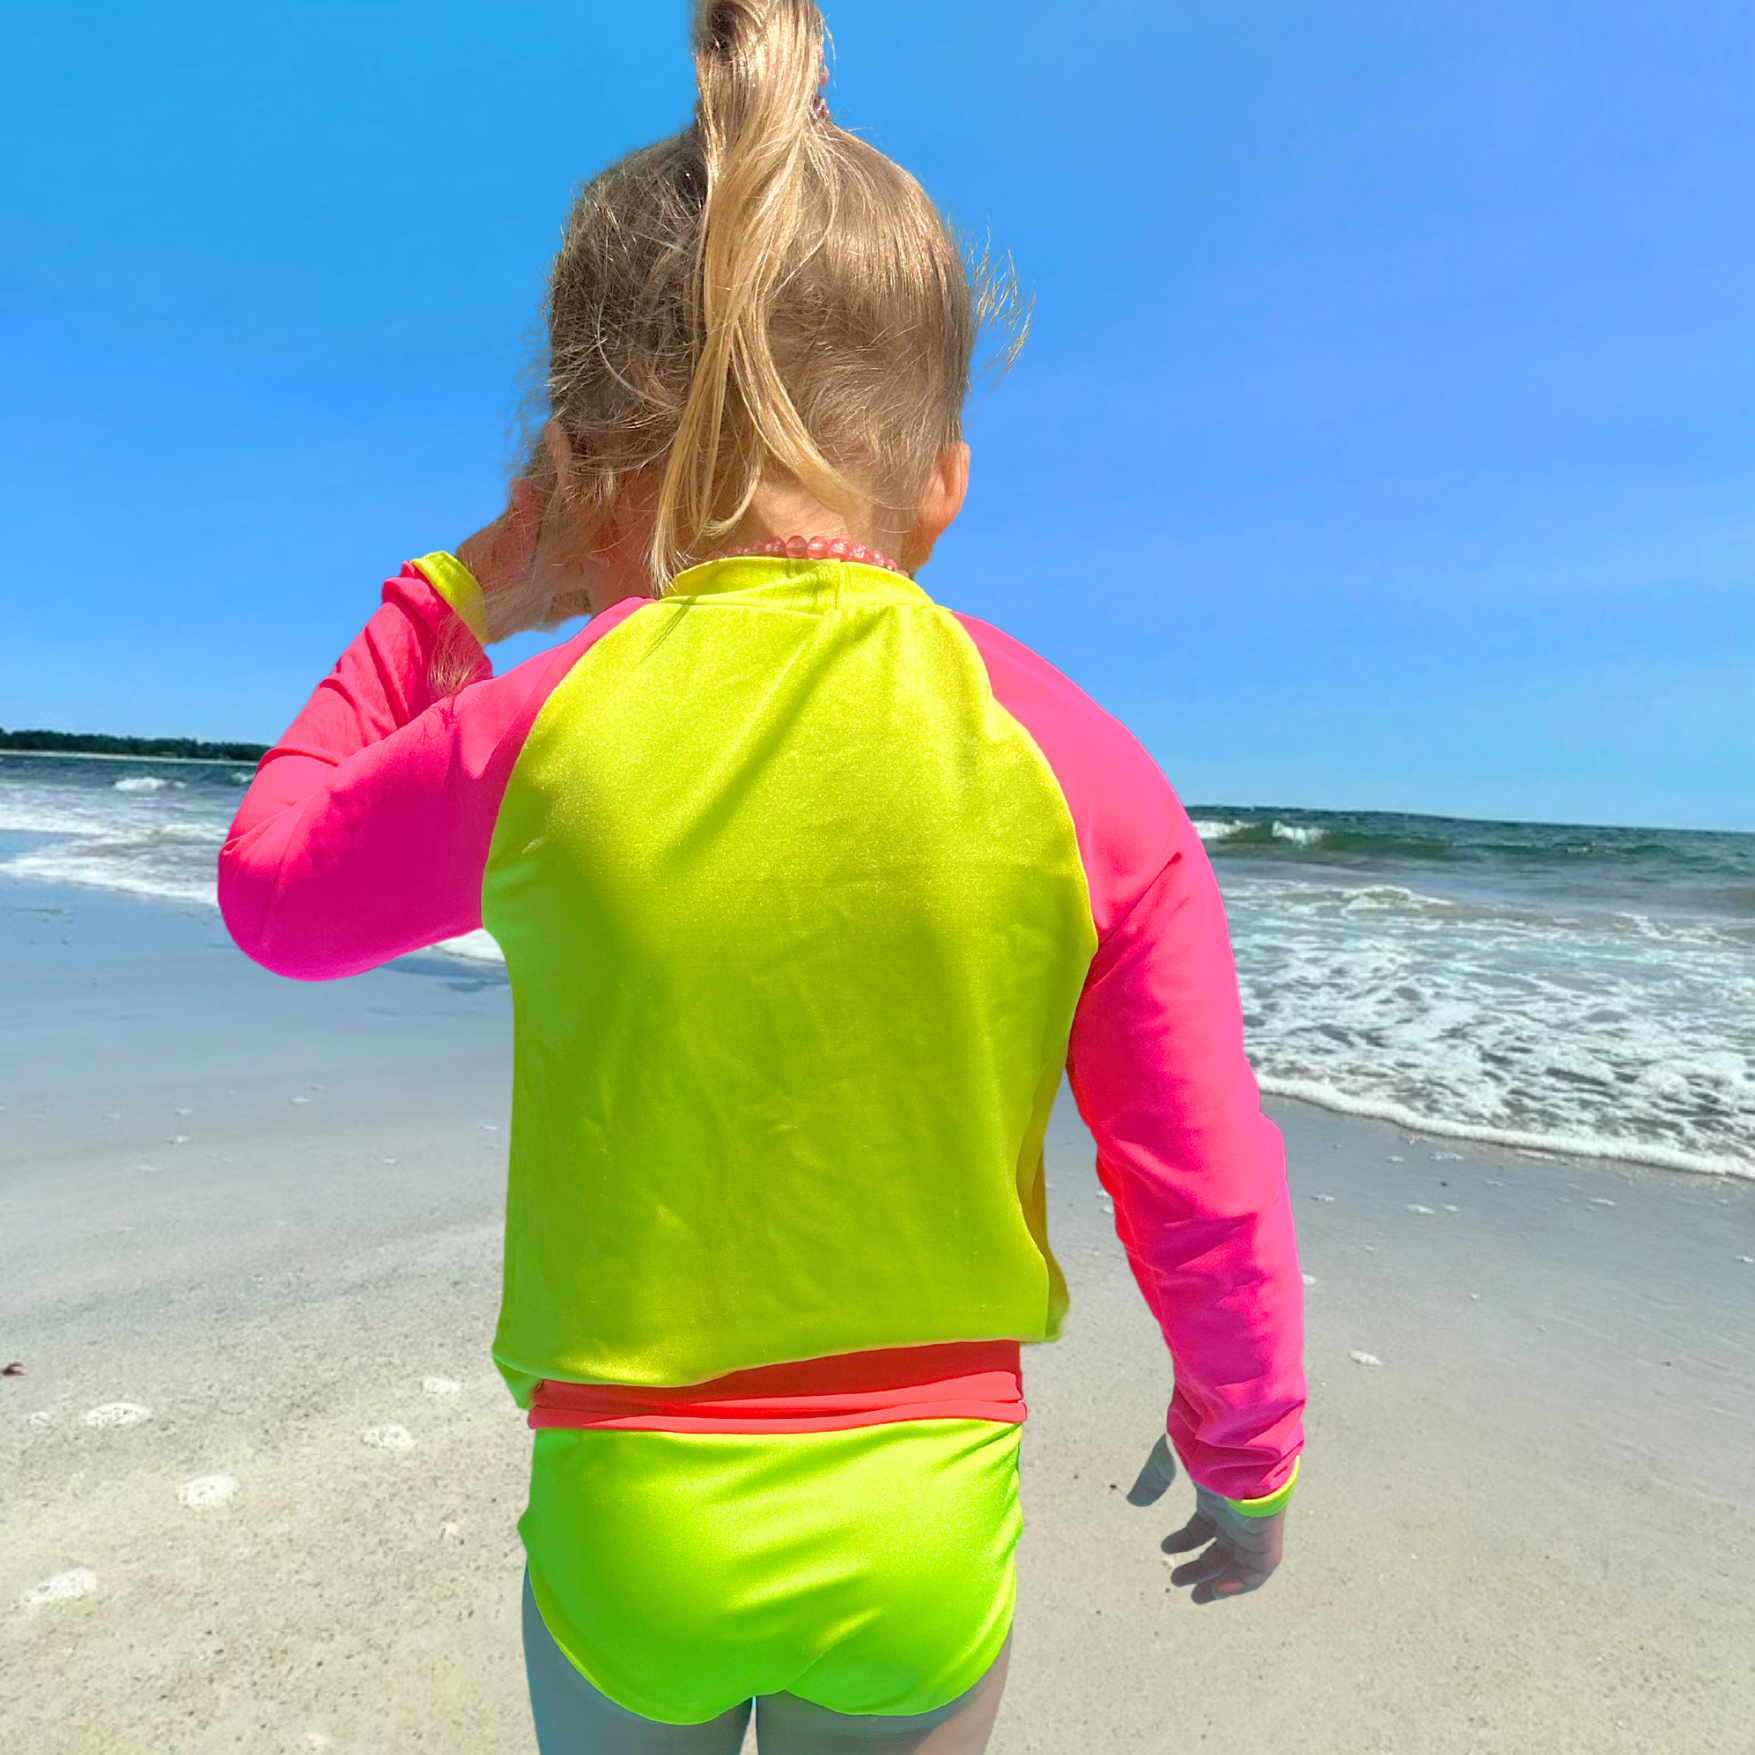 A kid standing on the beach back to the camera and facing the water. She is wearing a neon yellow rash guard with neon pink sleeves. She also has on neon swim bottoms from a neon bikini set with a neon pink waistband. She has one hand up on her face and the other by her side. 